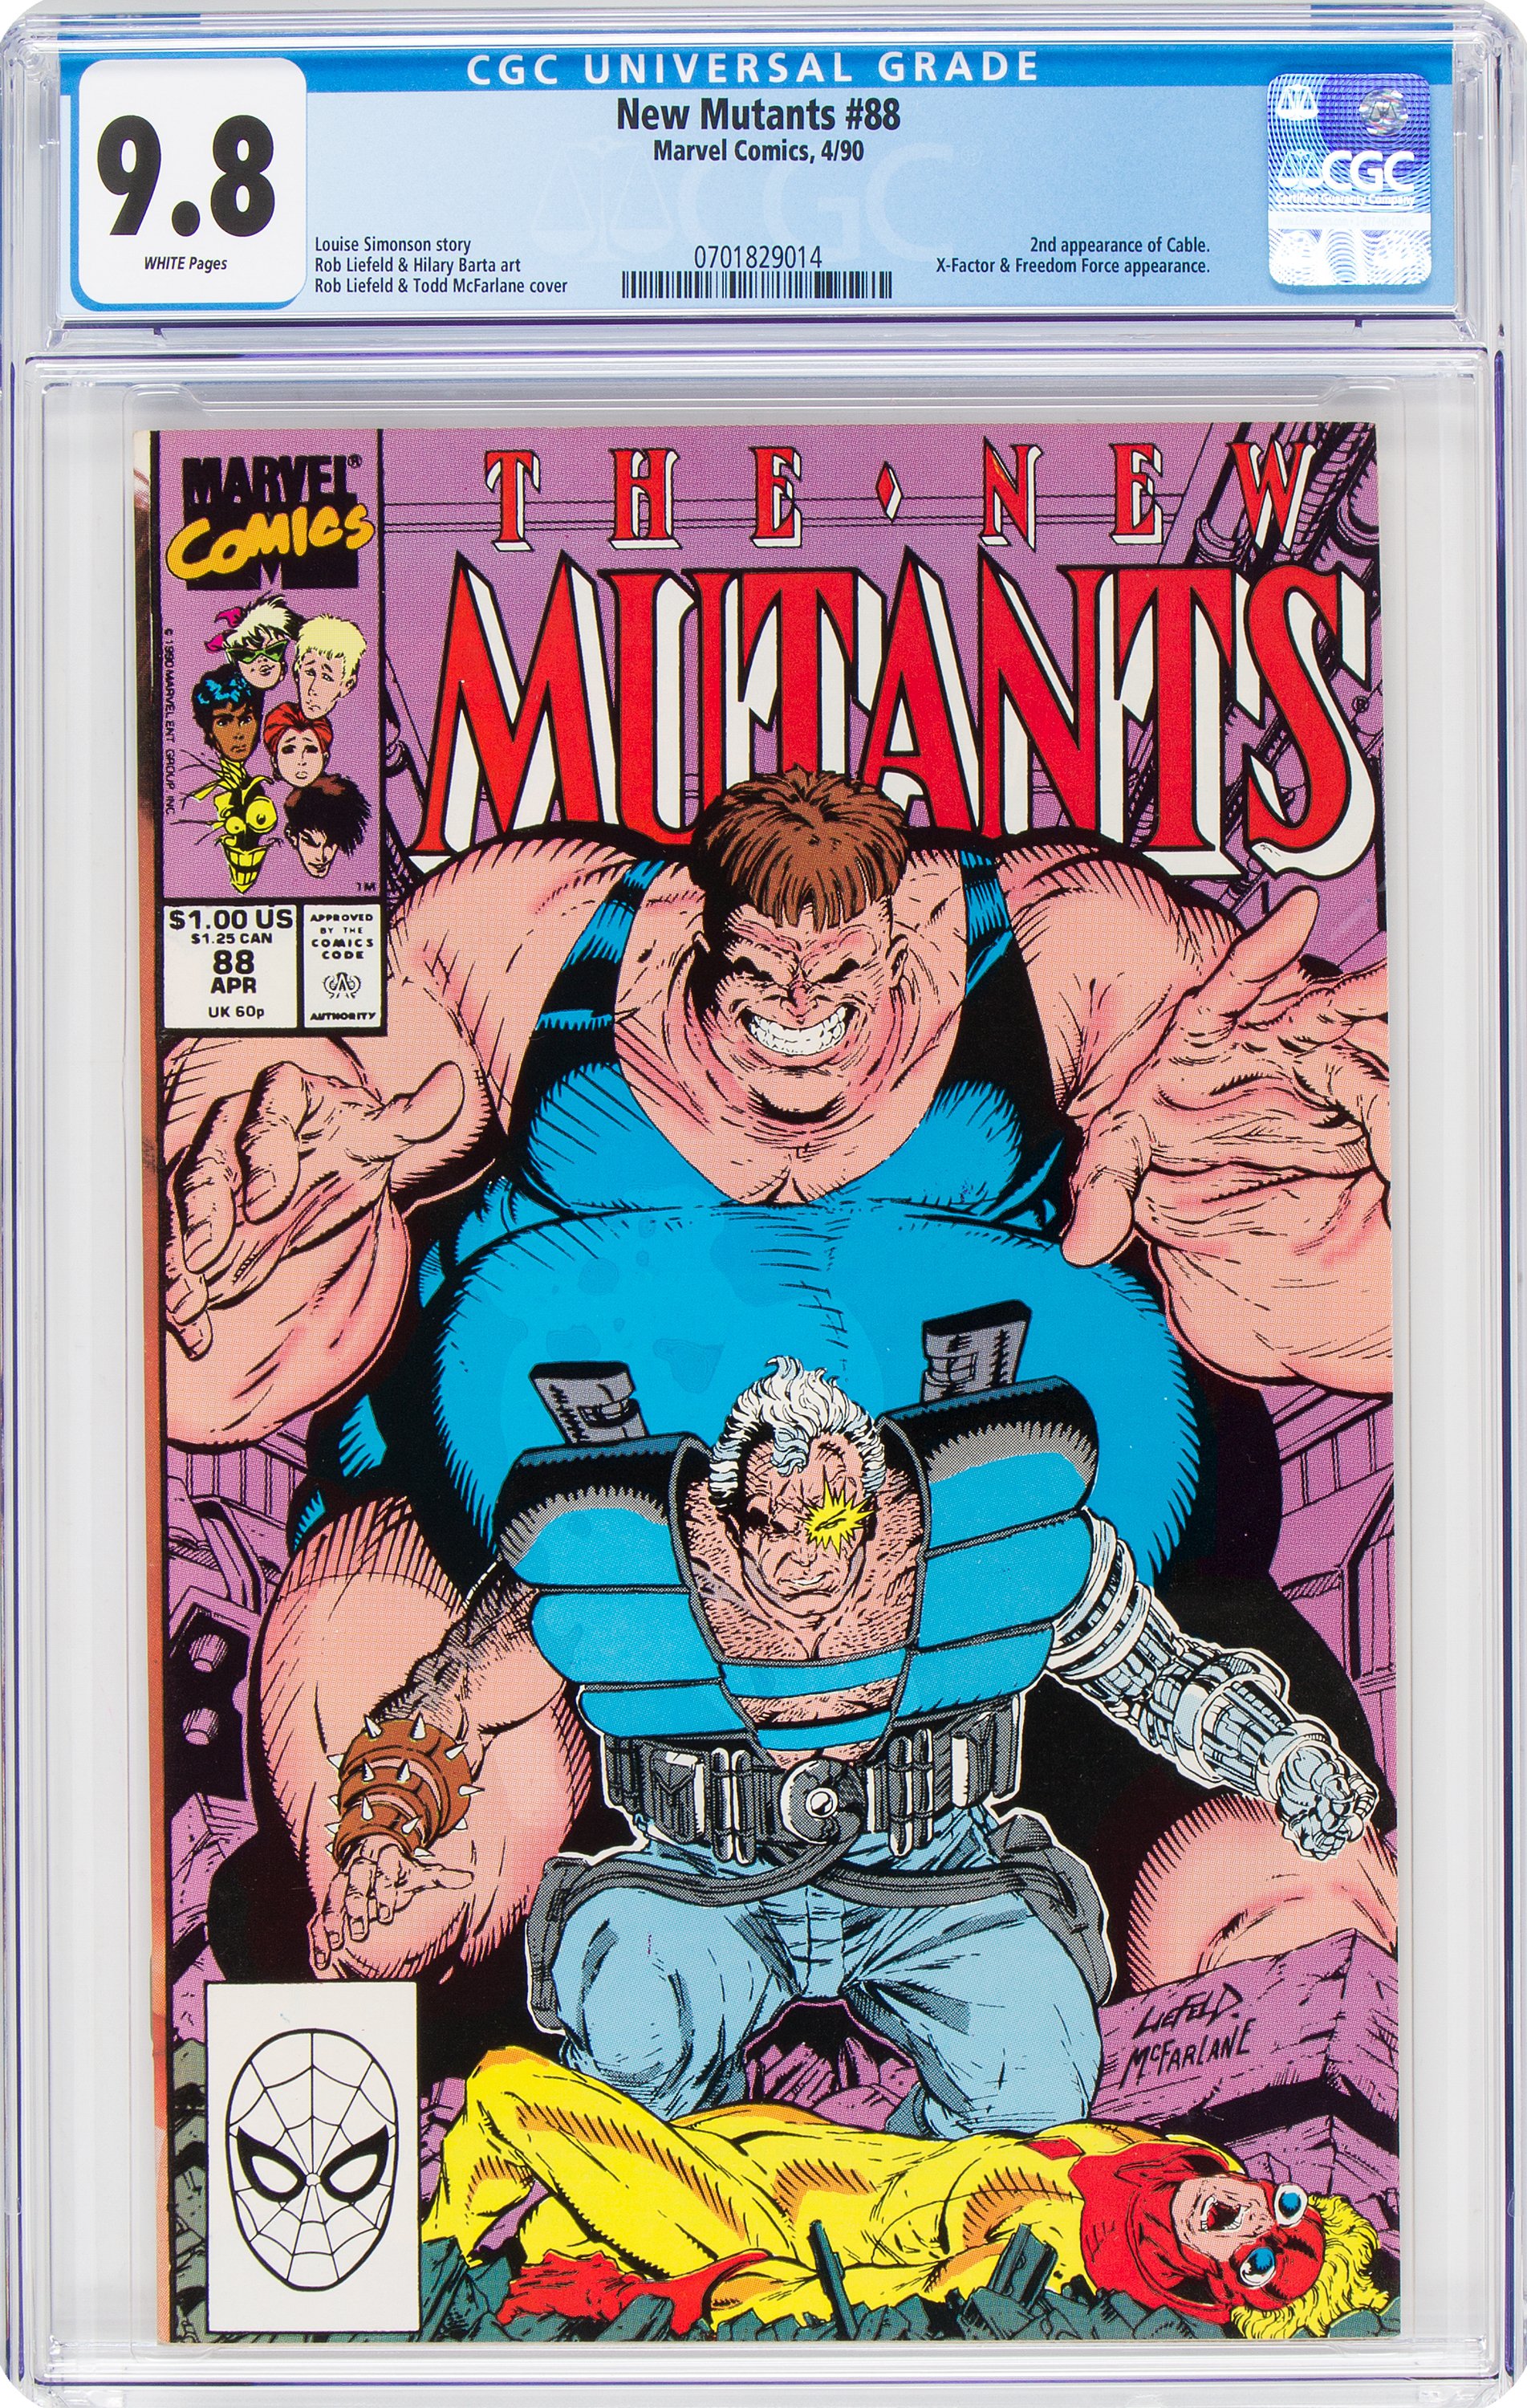 NEW MUTANTS #2 CGC 9.4 OW/WH PAGES